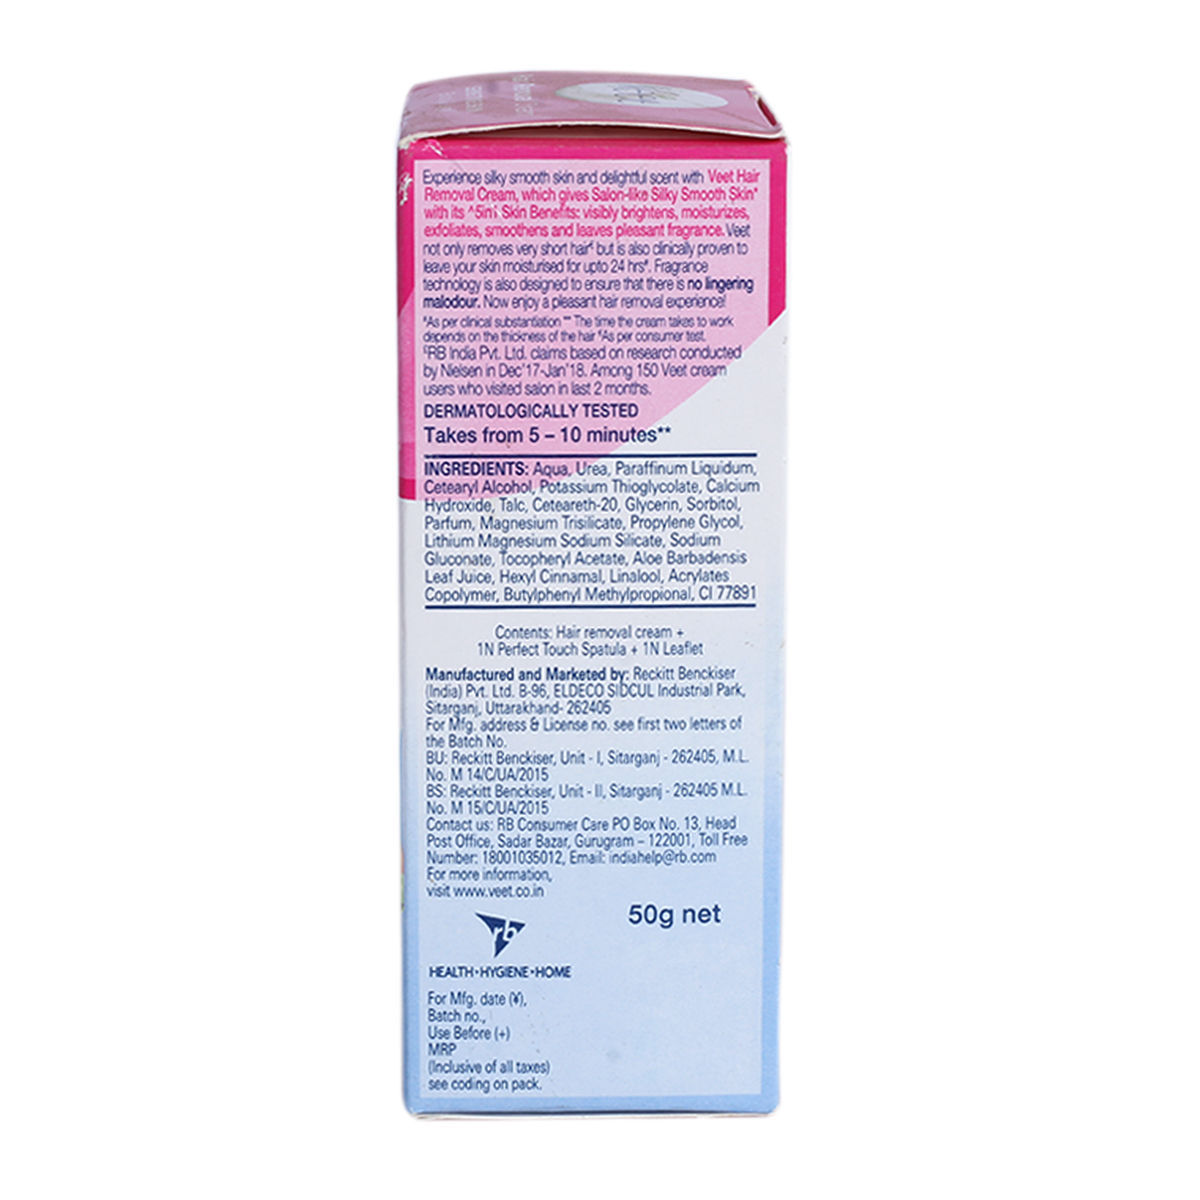 Veet 5 in 1 Skin Benefits Hair Removal Cream For Sensitive Skin, 25 gm  Price, Uses, Side Effects, Composition - Apollo Pharmacy